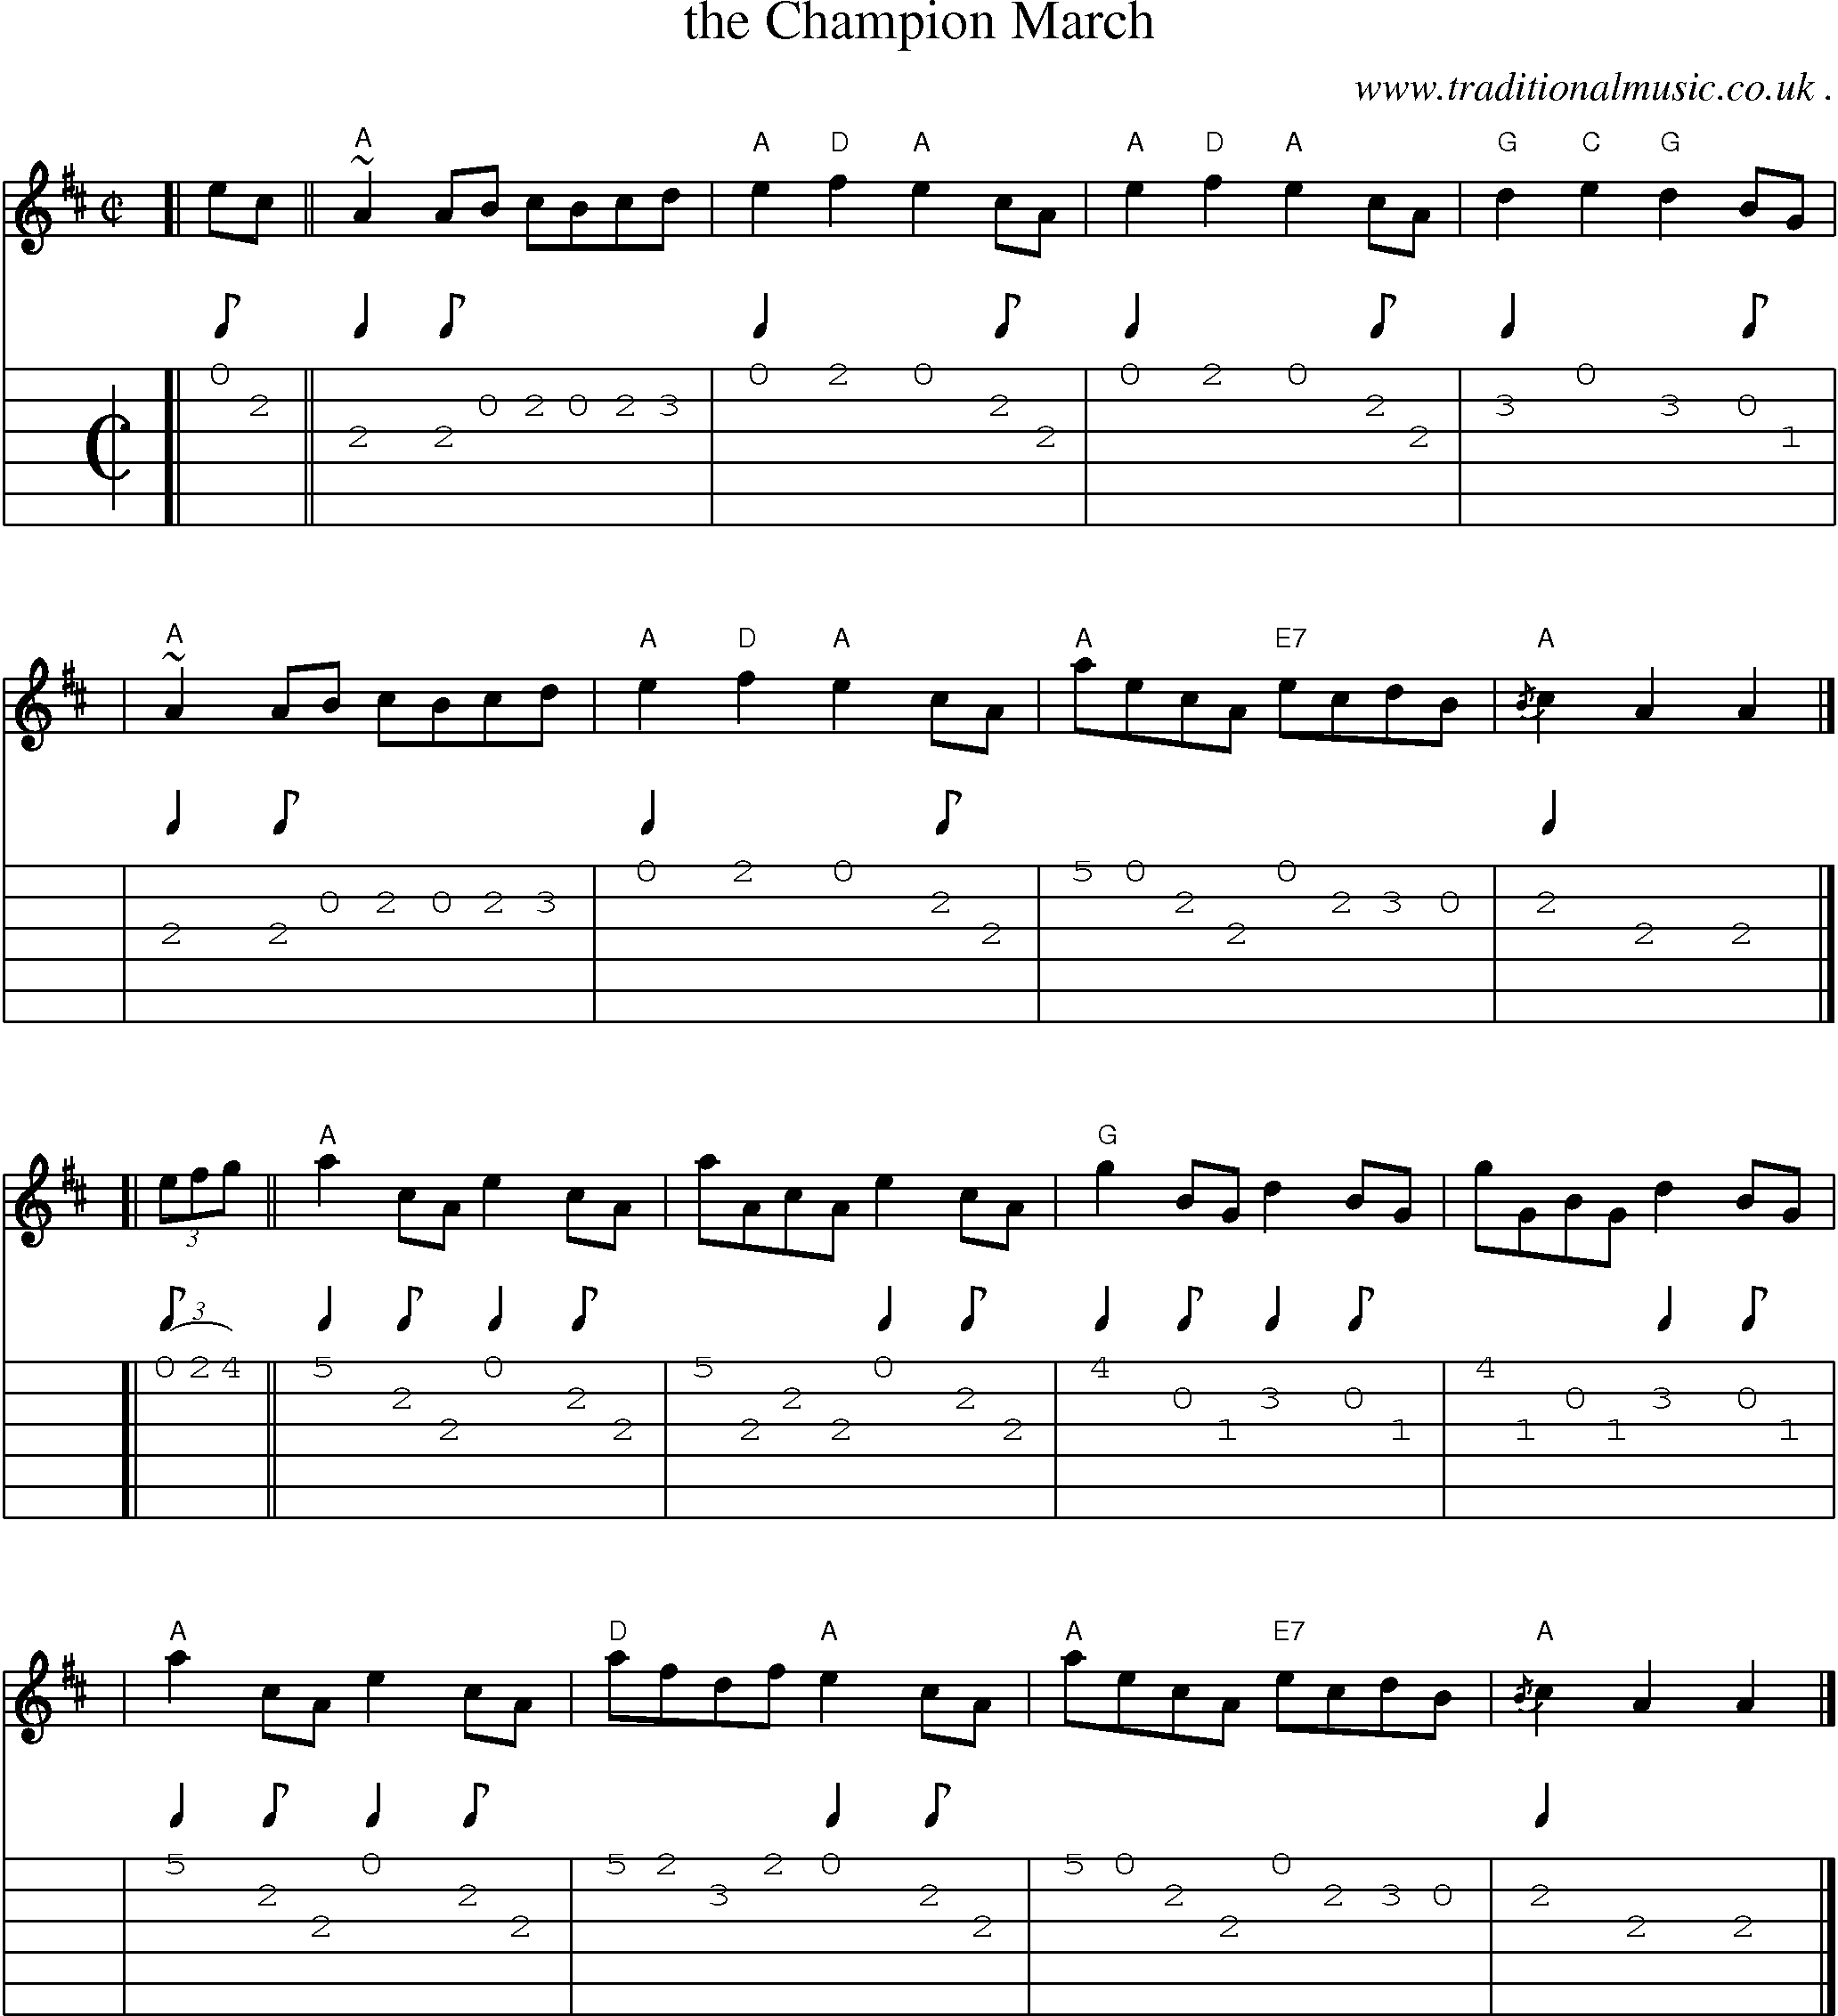 Sheet-music  score, Chords and Guitar Tabs for The Champion March